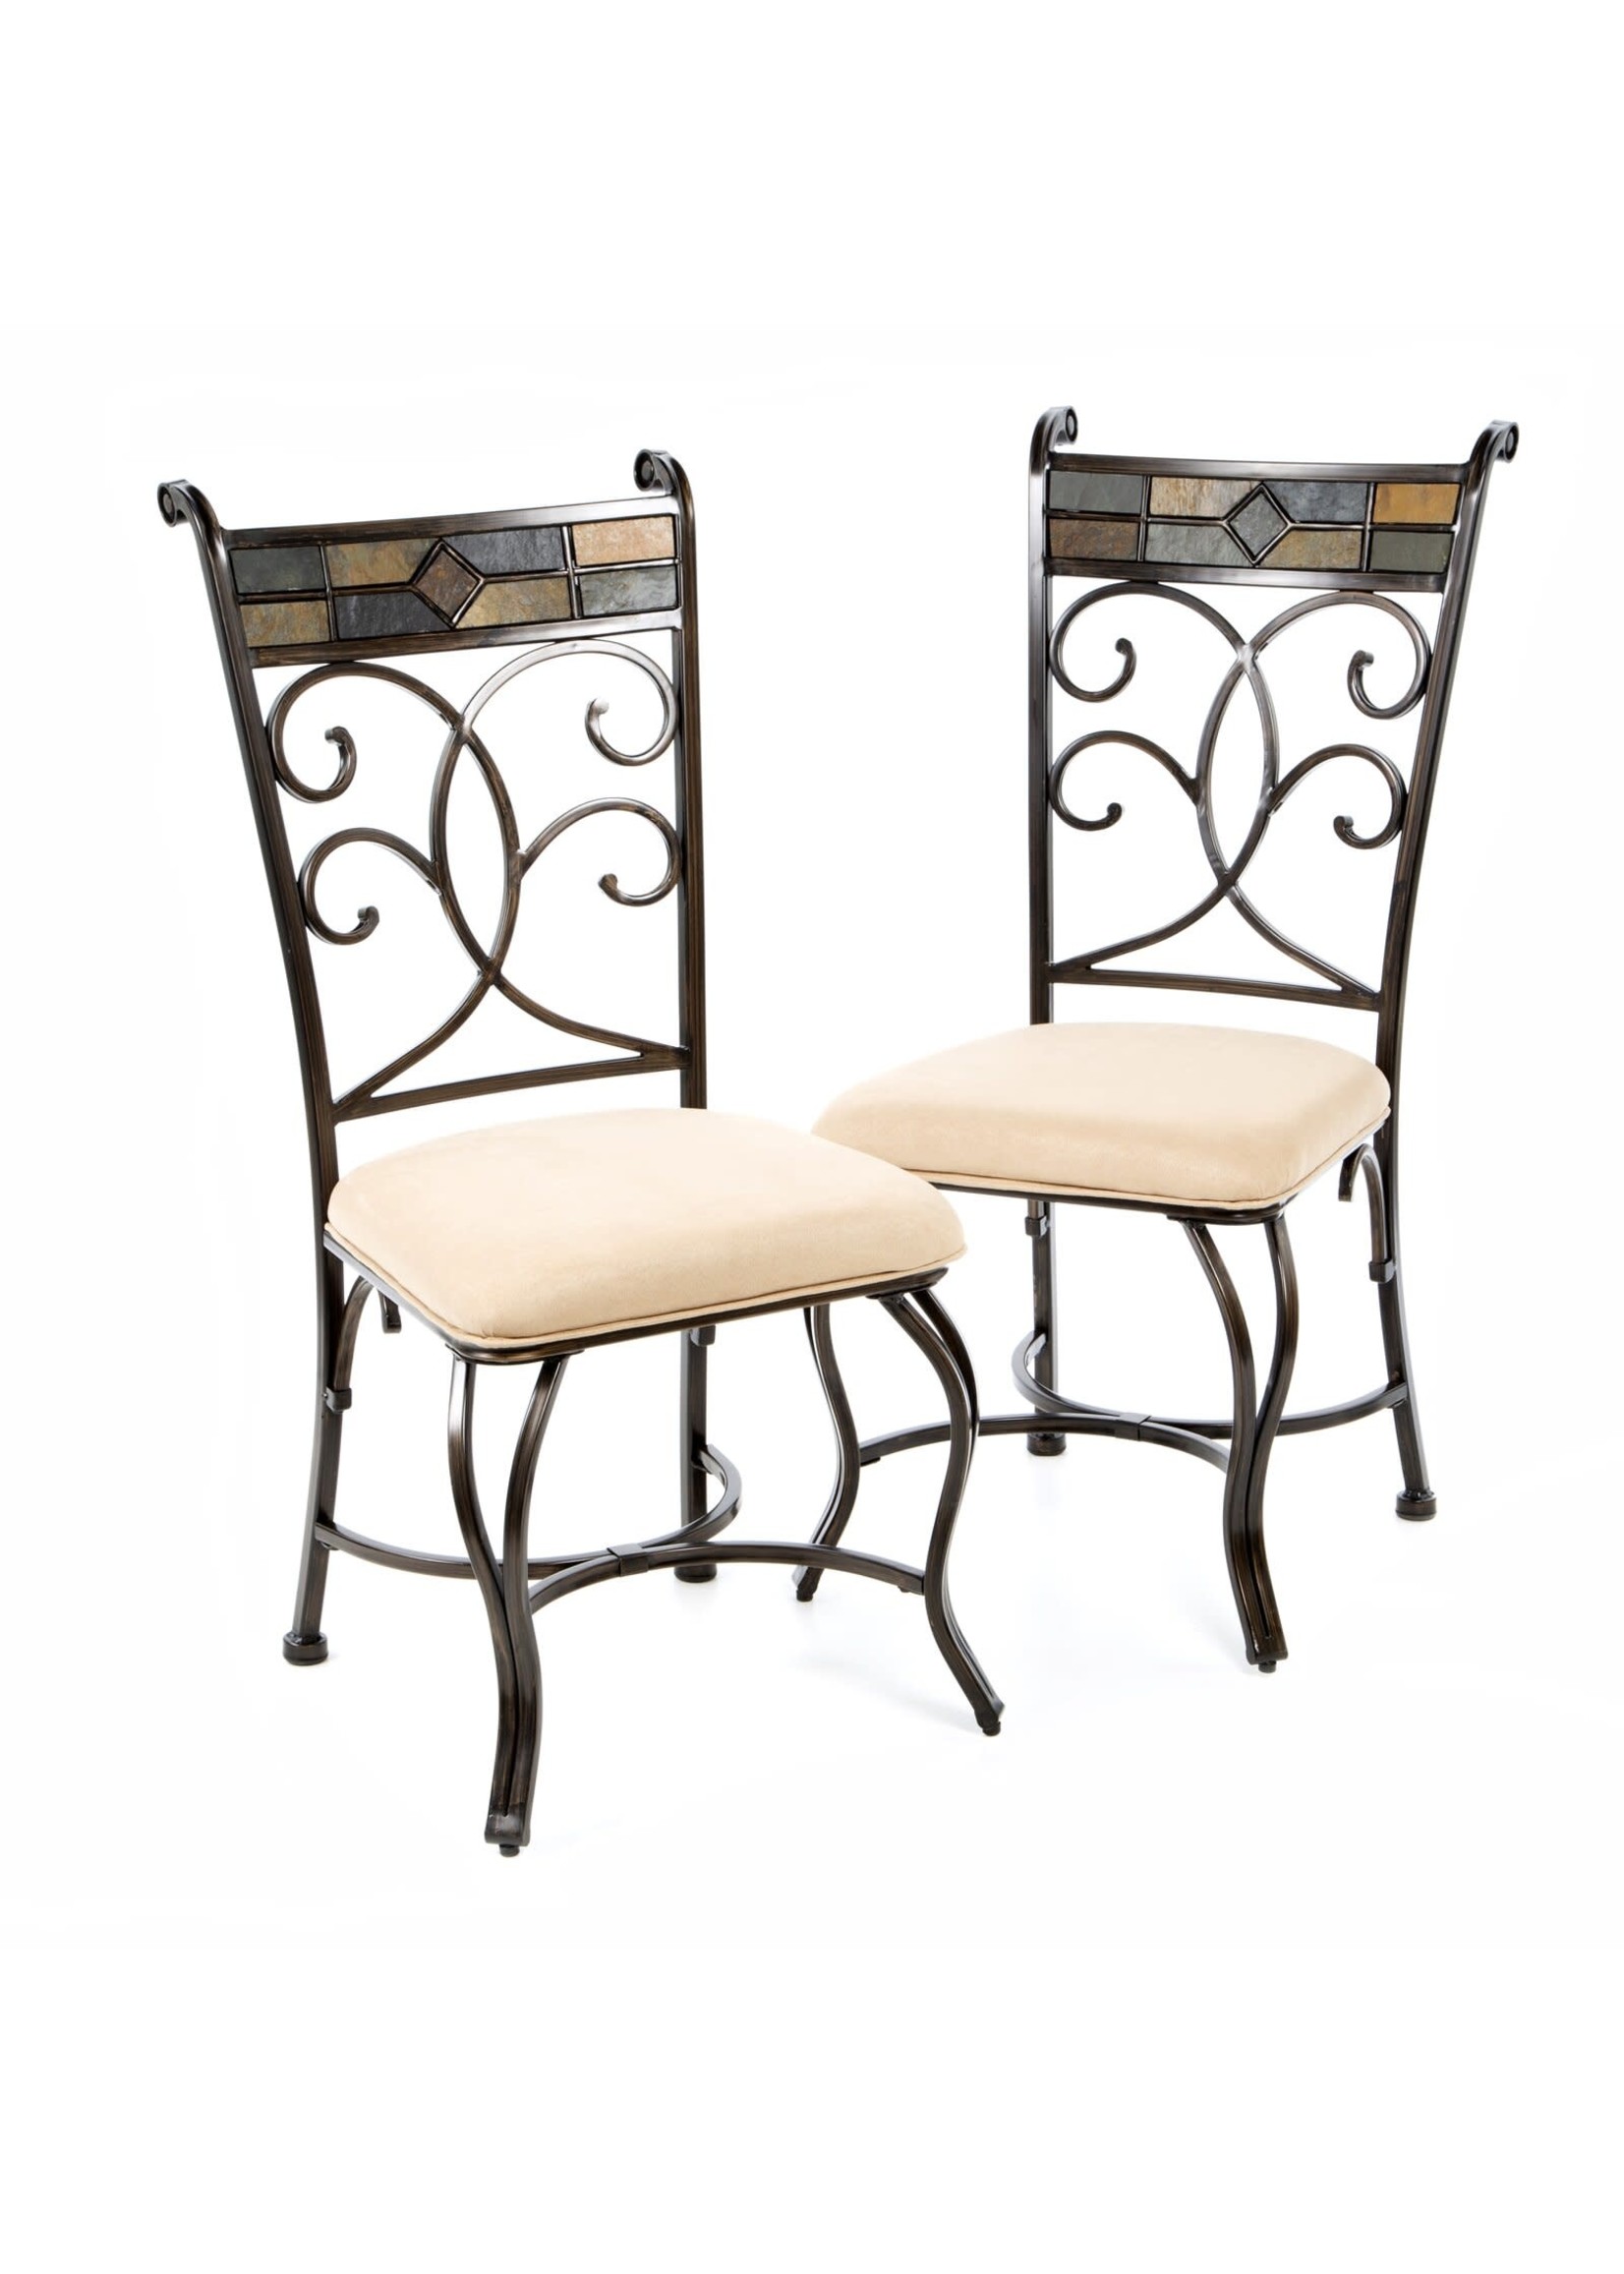 *Zamudio Upholstered Dining Chair - Set of 2